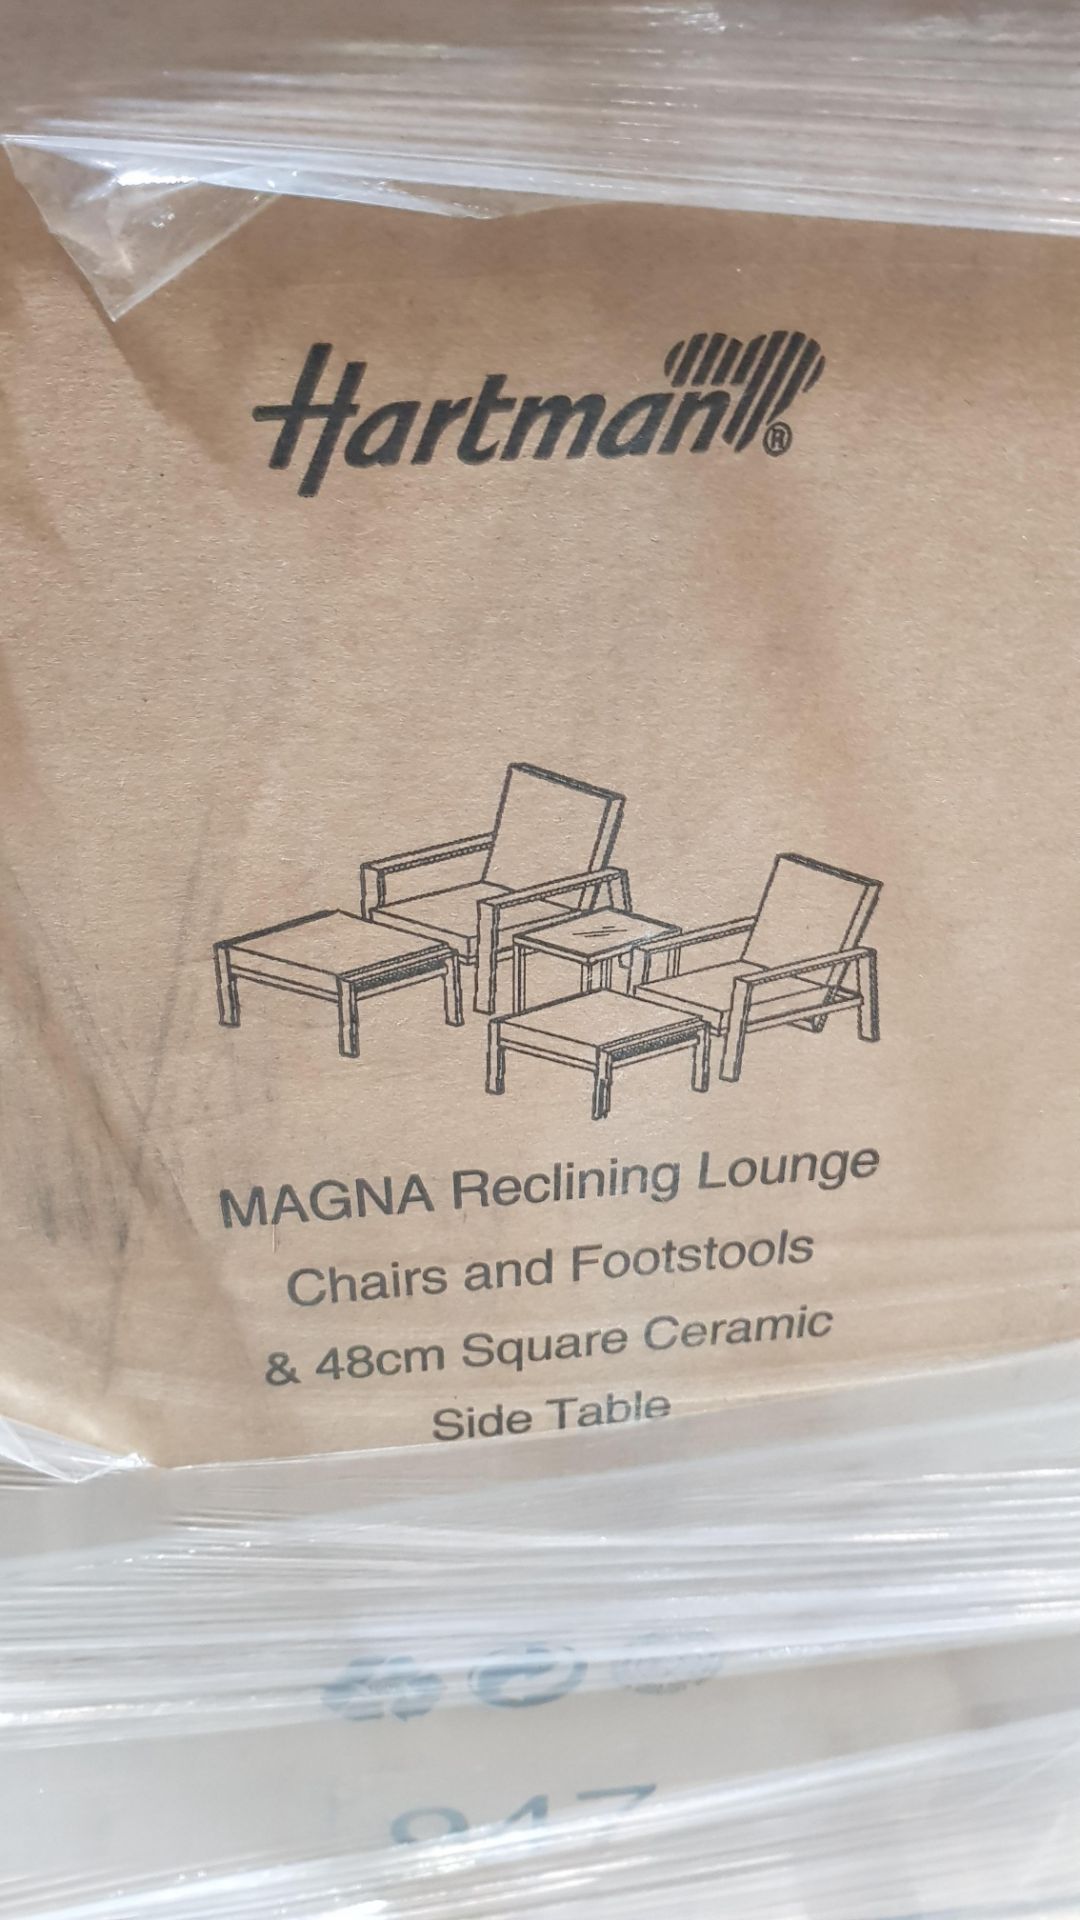 (Mz) 1x Hartman Magna Garden Furniture Set. 2x Reclining Lounge Chairs And Footstools. 1x 48cm Squa - Image 3 of 3